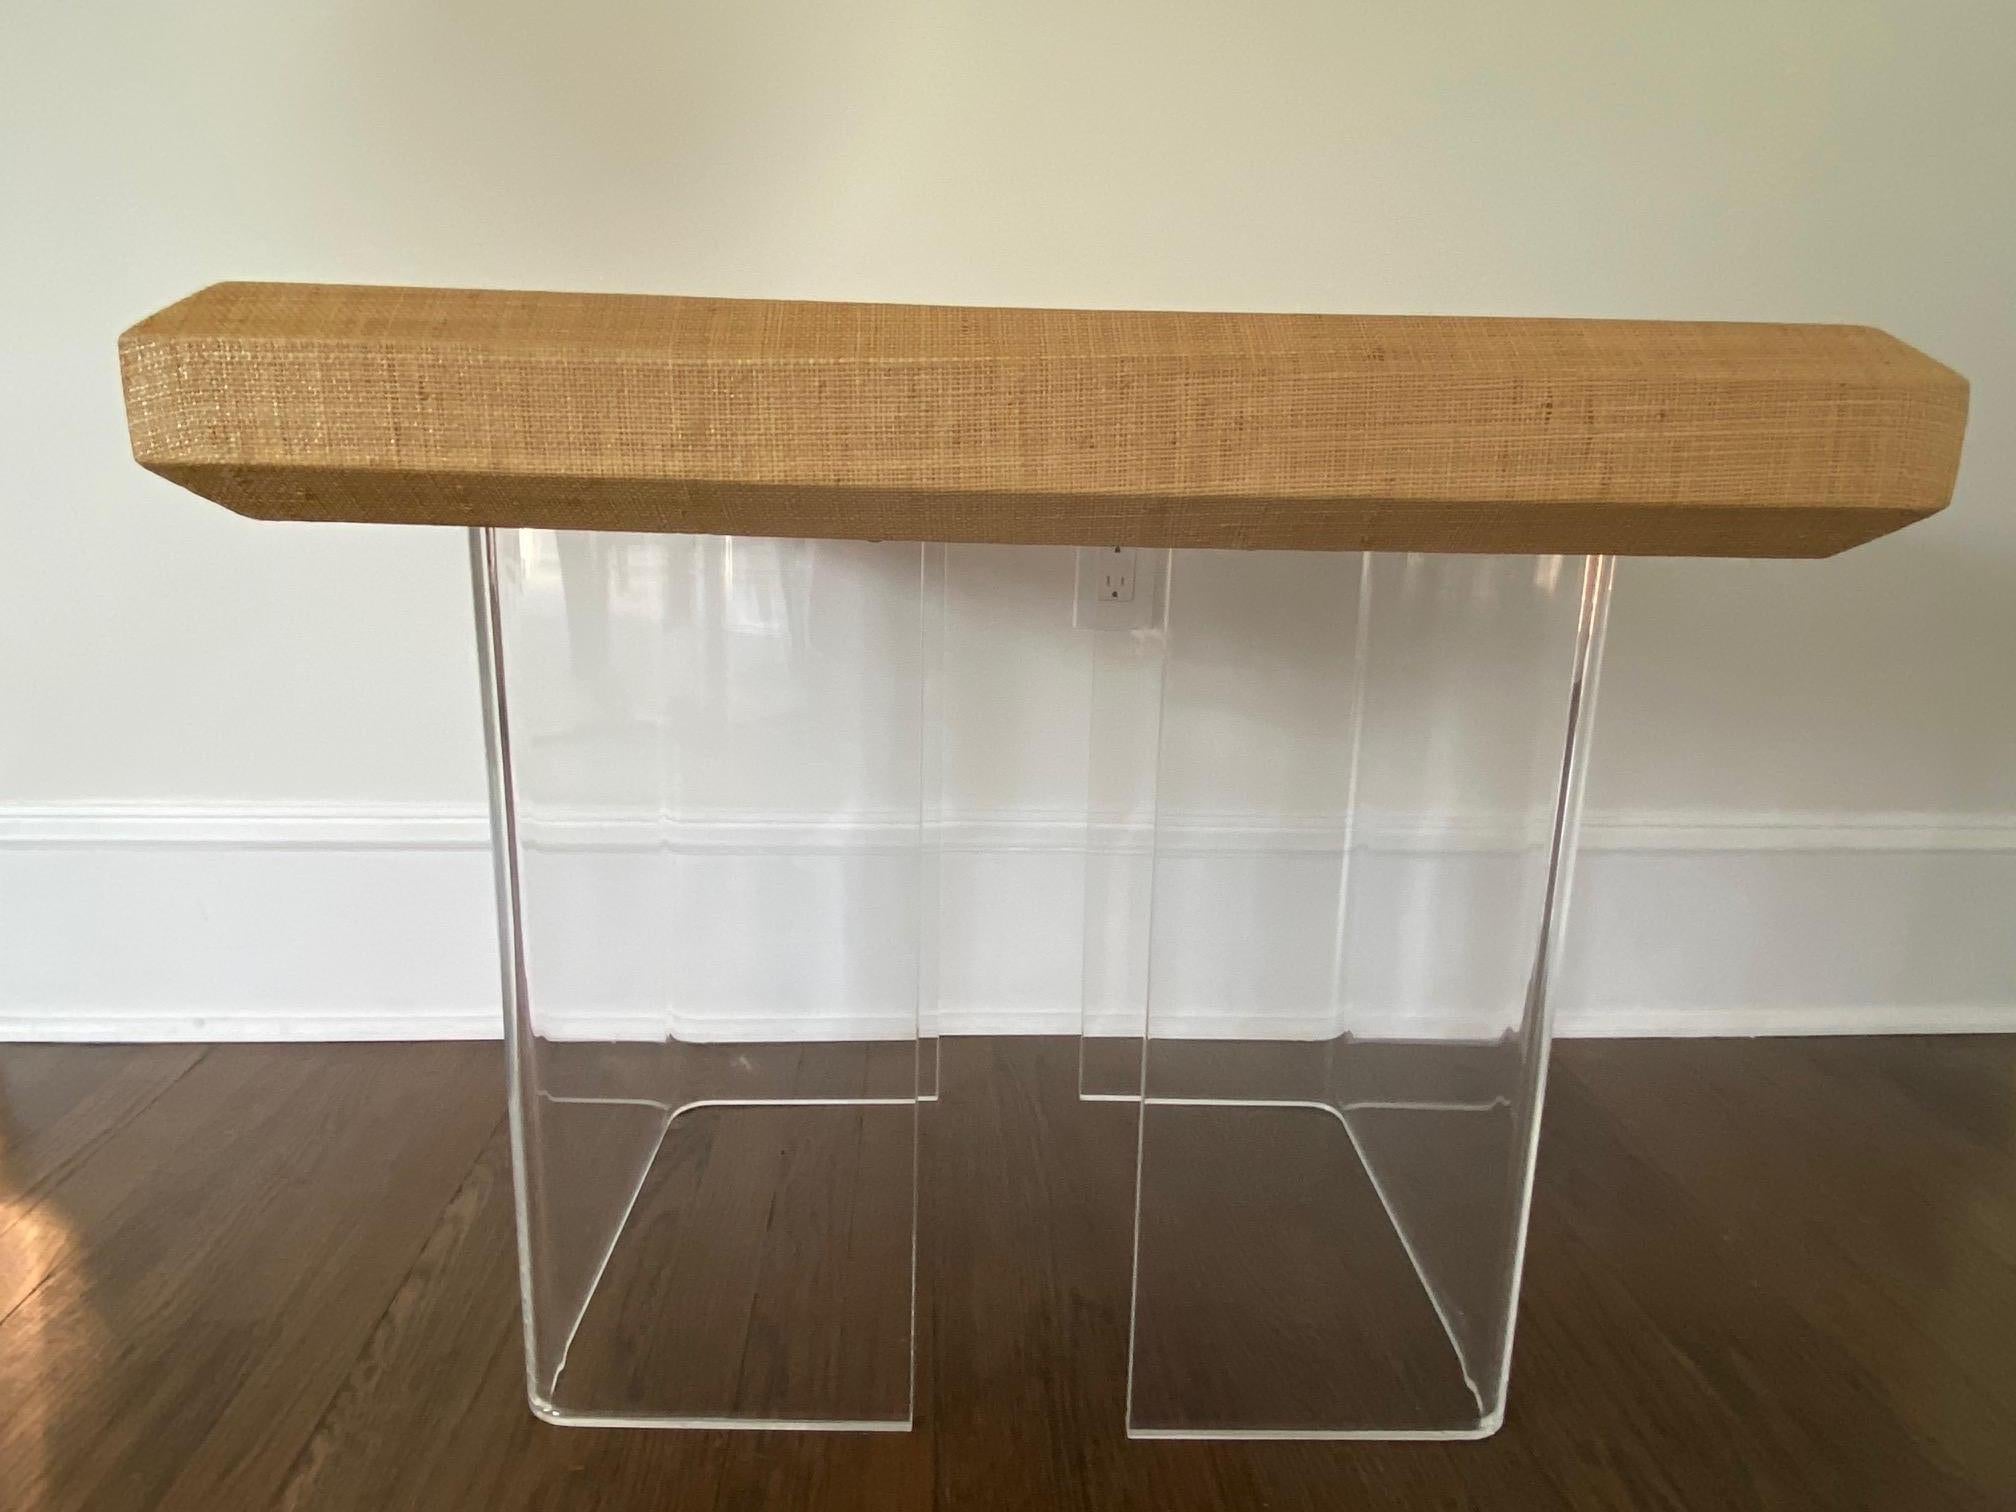  Chic Mid Century Modern Lucite & Laminated Raffia Table In Good Condition For Sale In Hopewell, NJ